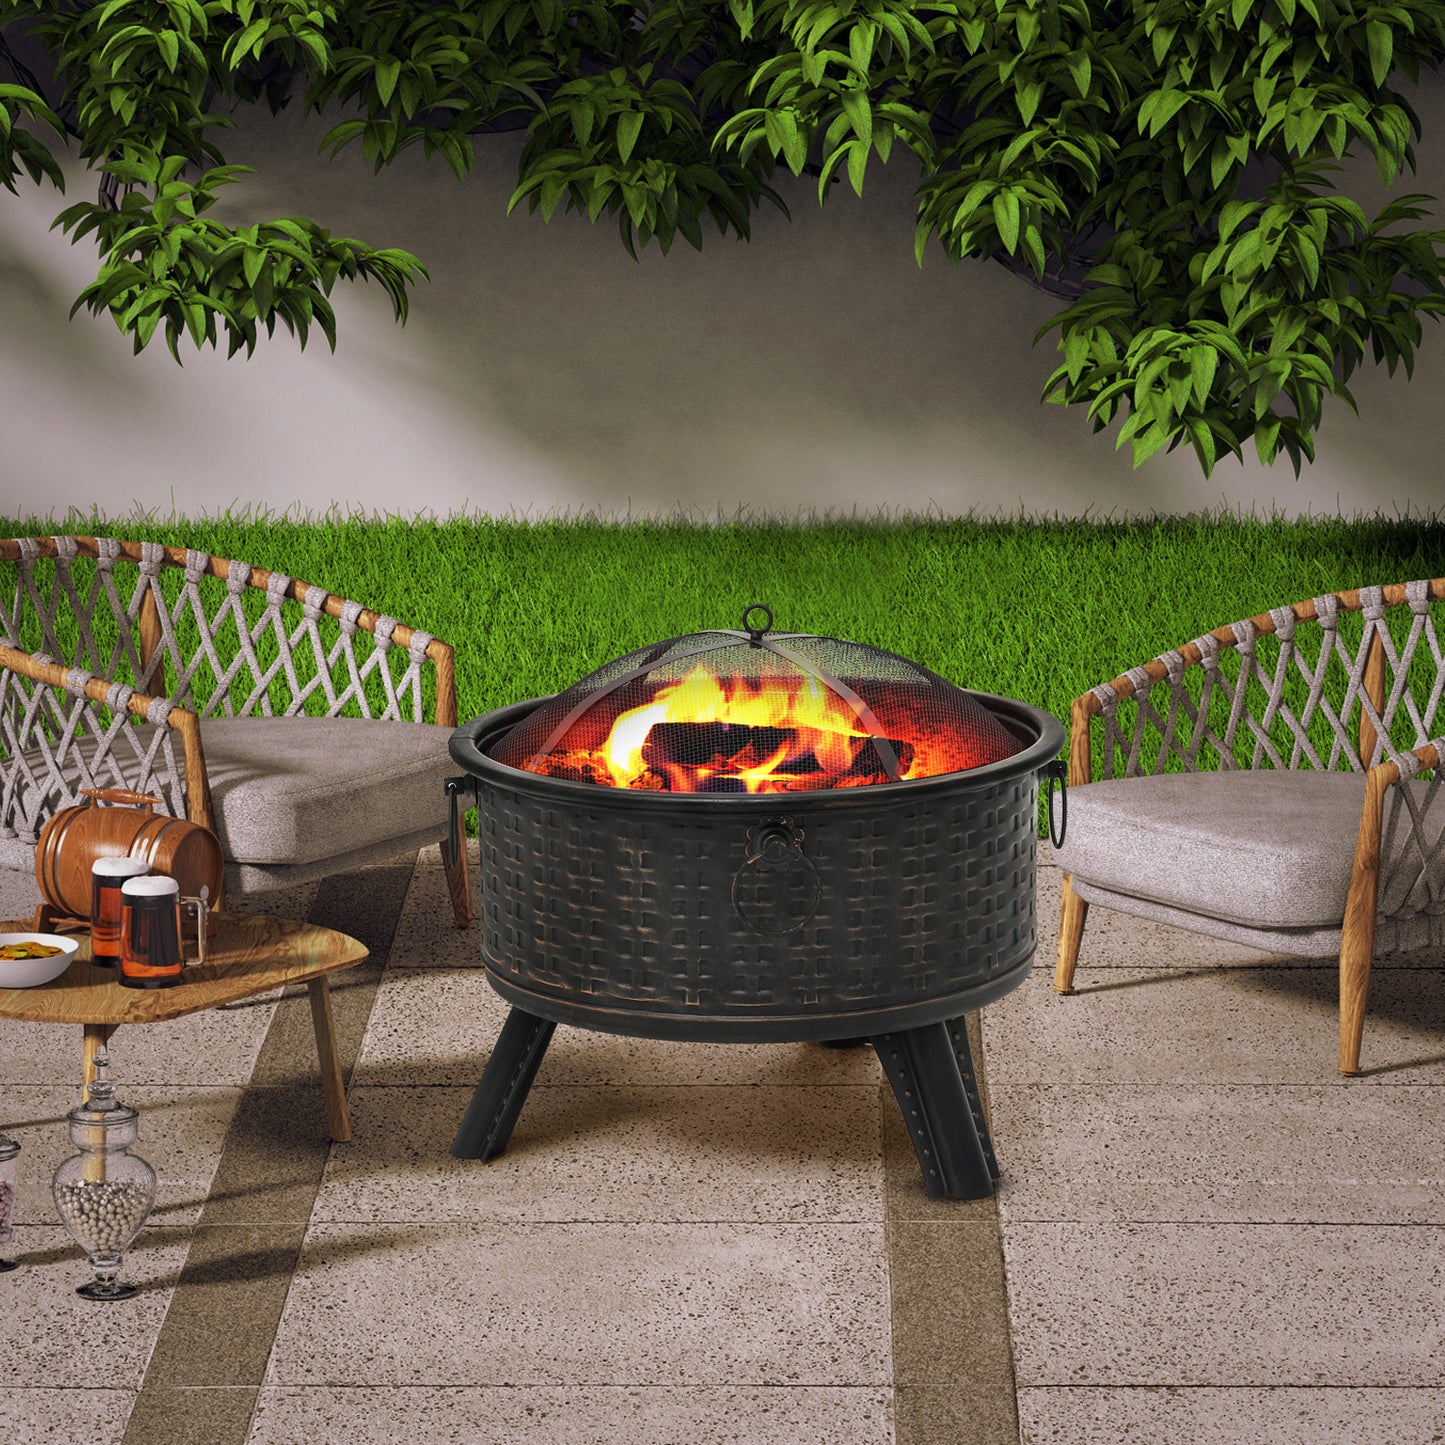 26" Round Fire Pit w/Poker & Spark Screen